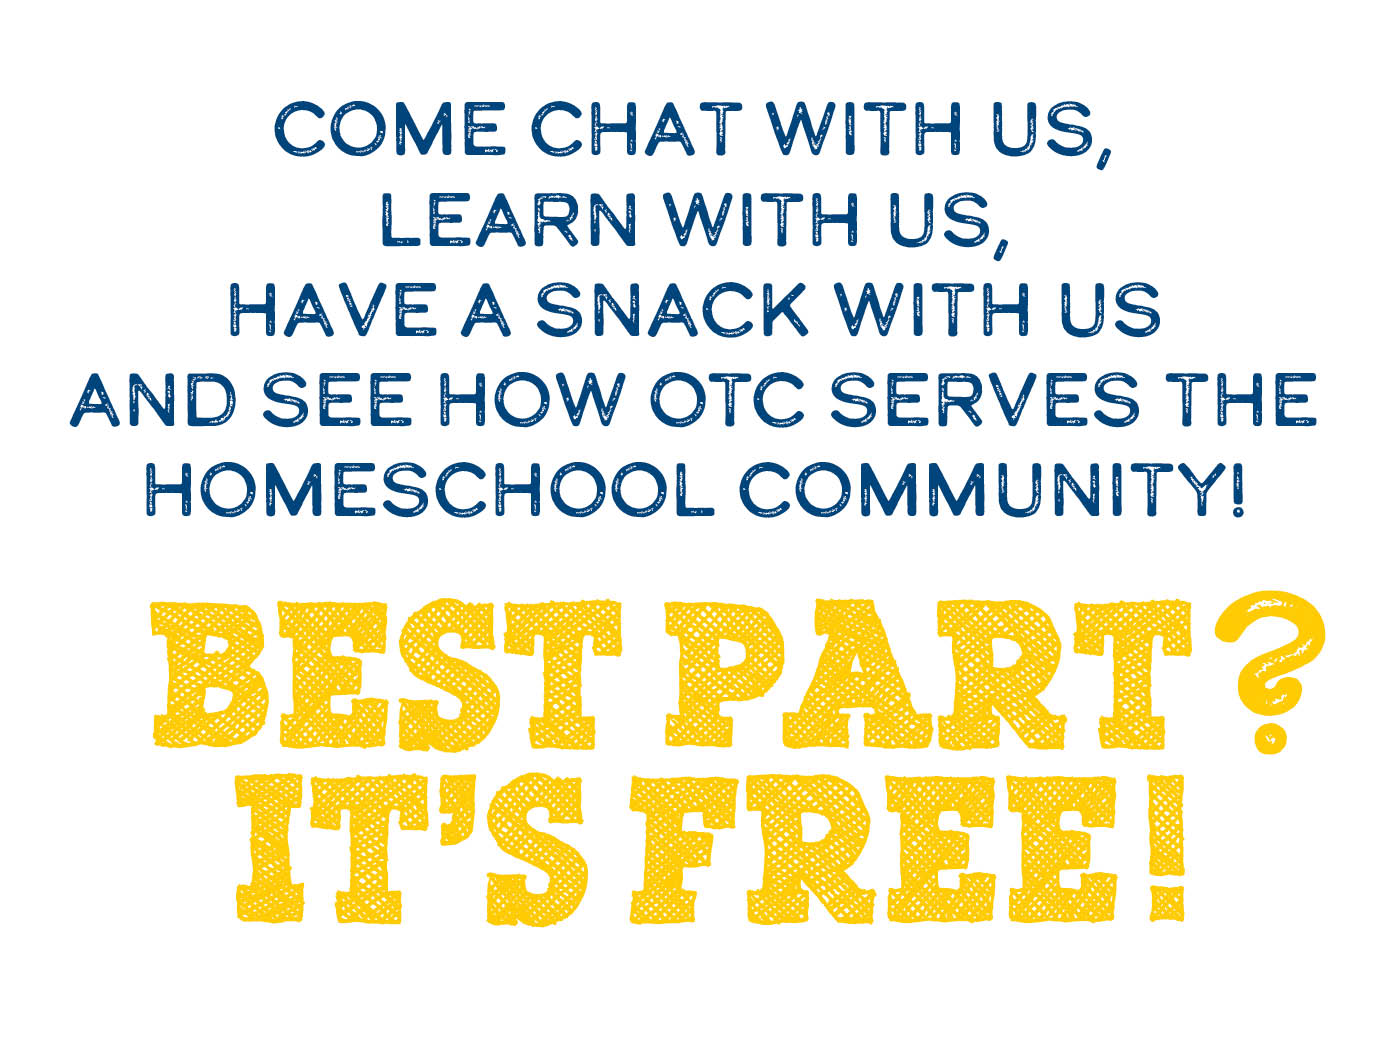 Come chat with us, Learn with us, have a snack with us, and see how OTC serves the homeschool community. Best part? It's free